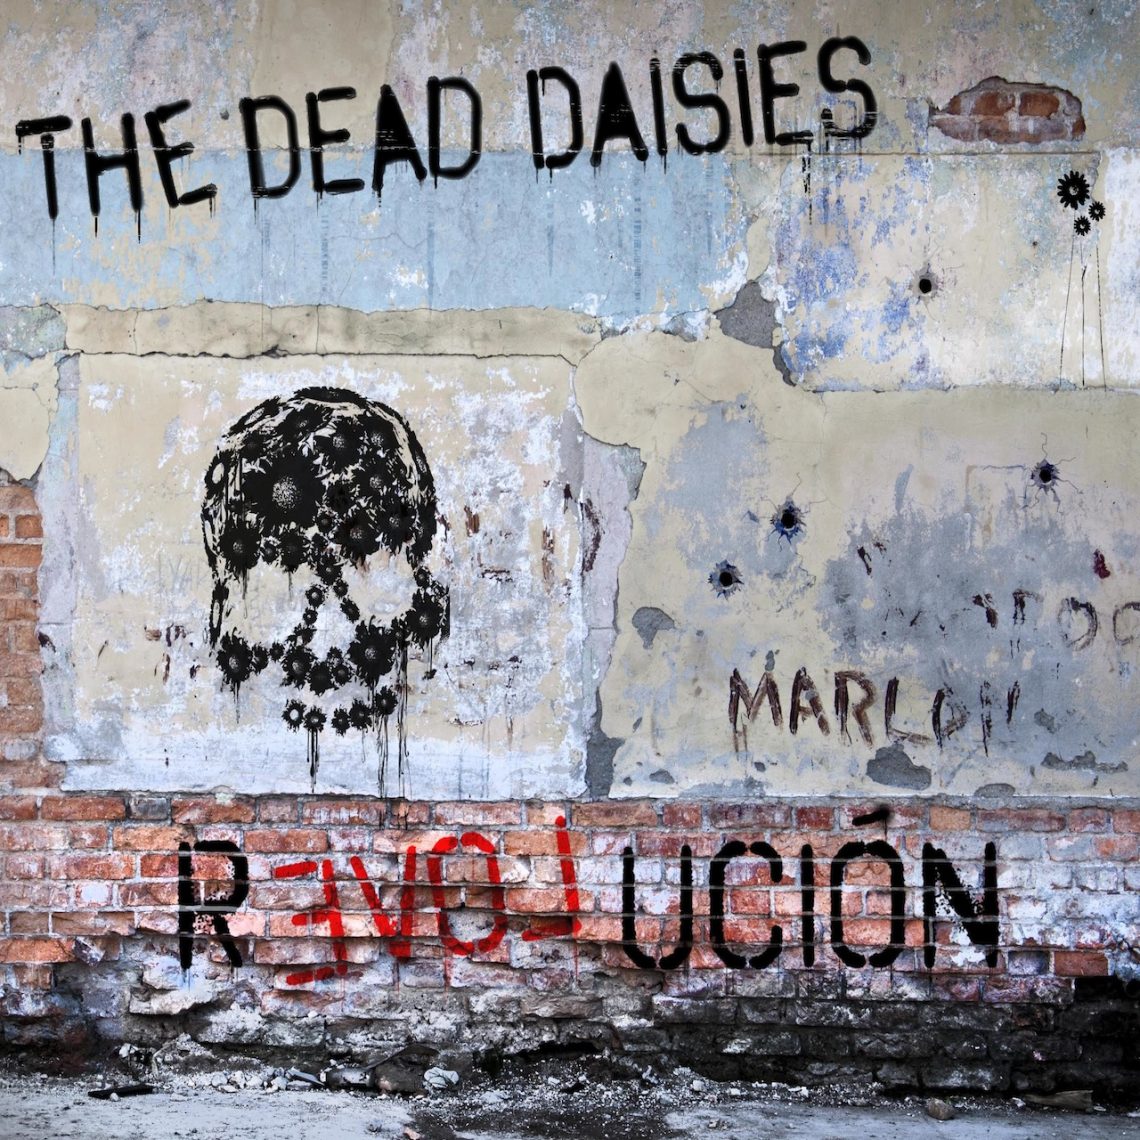 The Dead Daisies Announce UK Tour In December